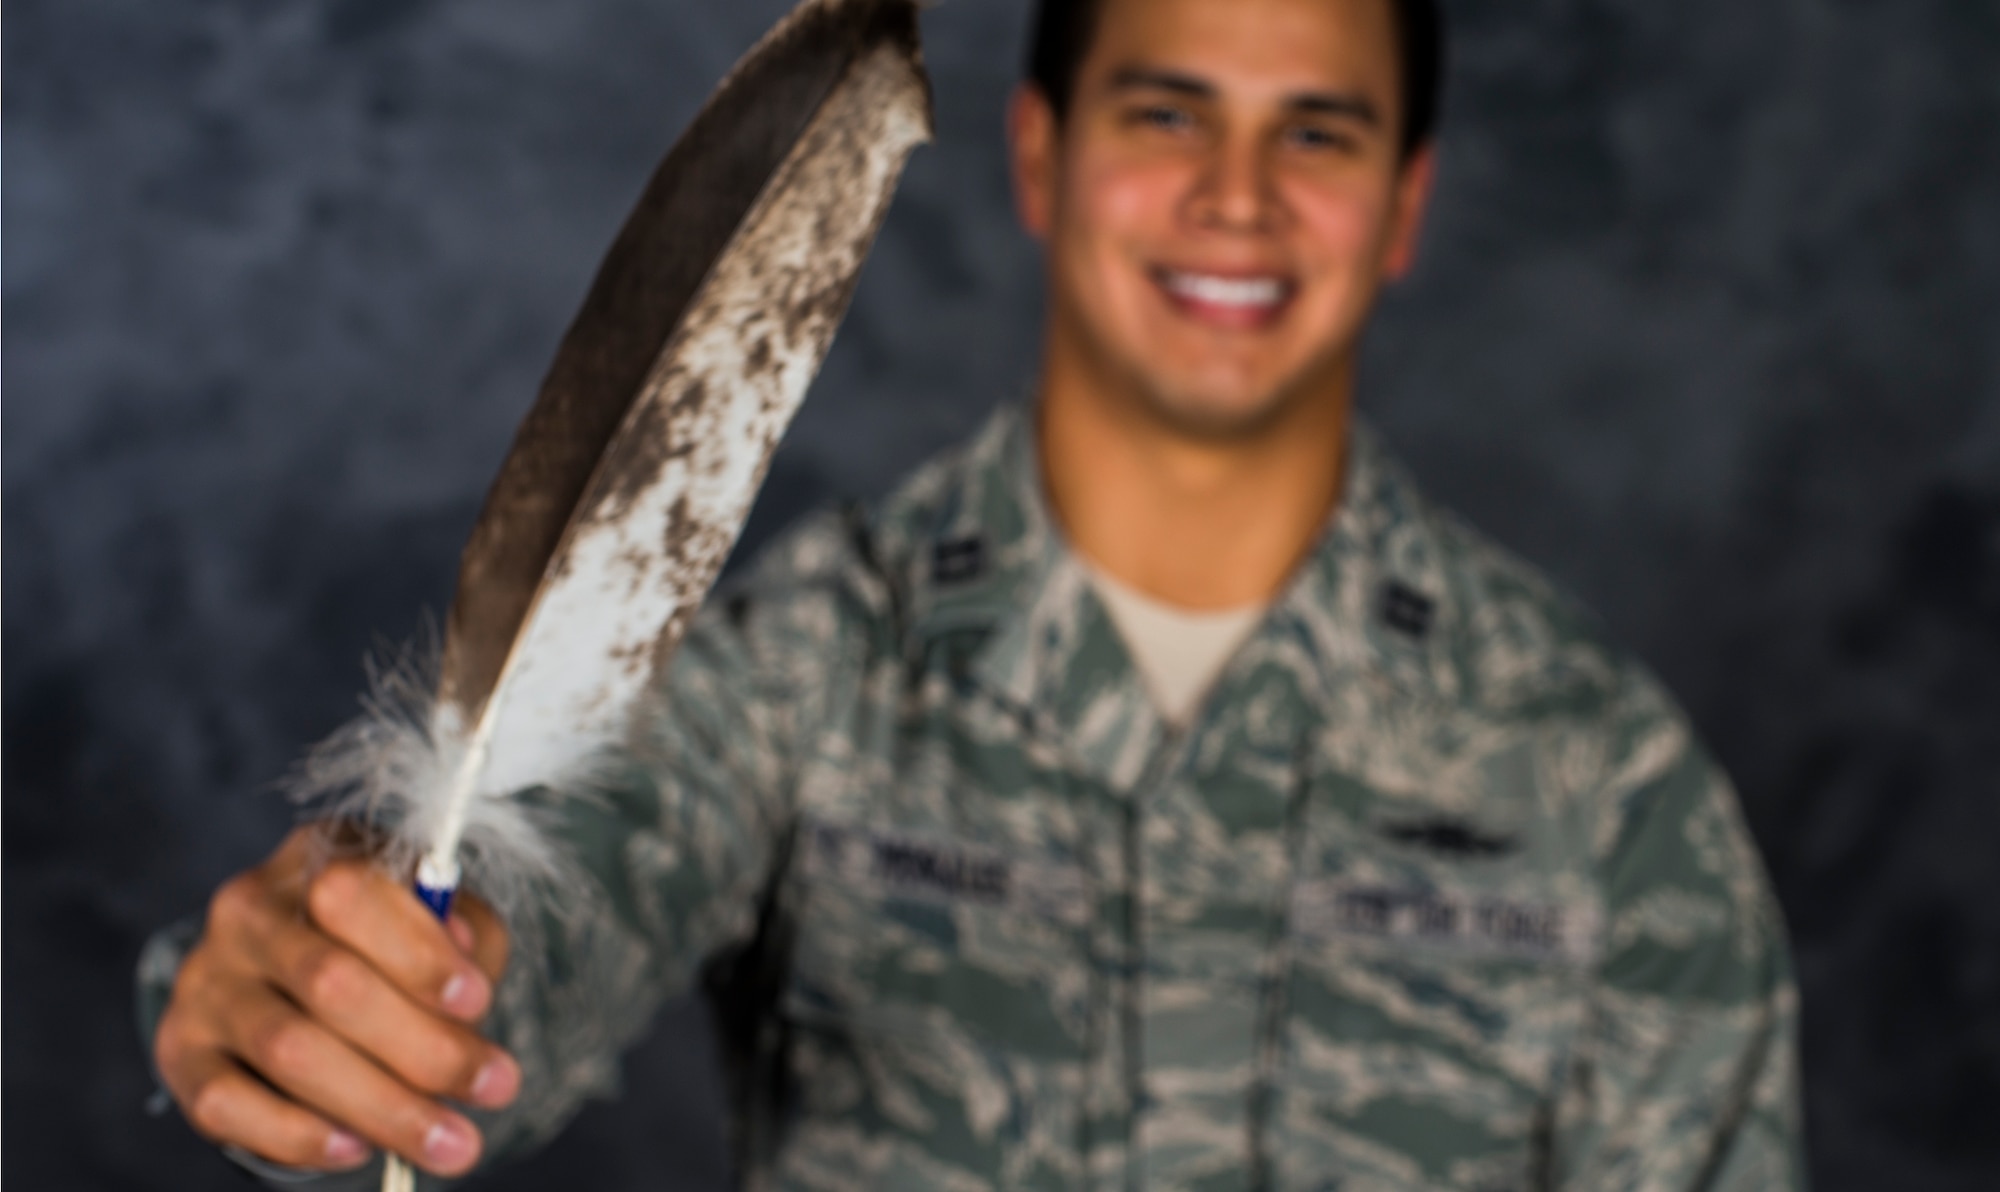 Capt. Myles Morales poses for a photo holding his eagle feather Dec. 3, 2014, at Moody Air Force Base, Ga. Morales received the eagle feather during a naming ceremony held in his honor by the Lakota Sioux tribe on Standing Rock Reservation, South Dakota. Morales is the 336th Recruiting Squadron support flight commander. (U.S. Air Force photo/Airman 1st Class Ceaira Tinsley)